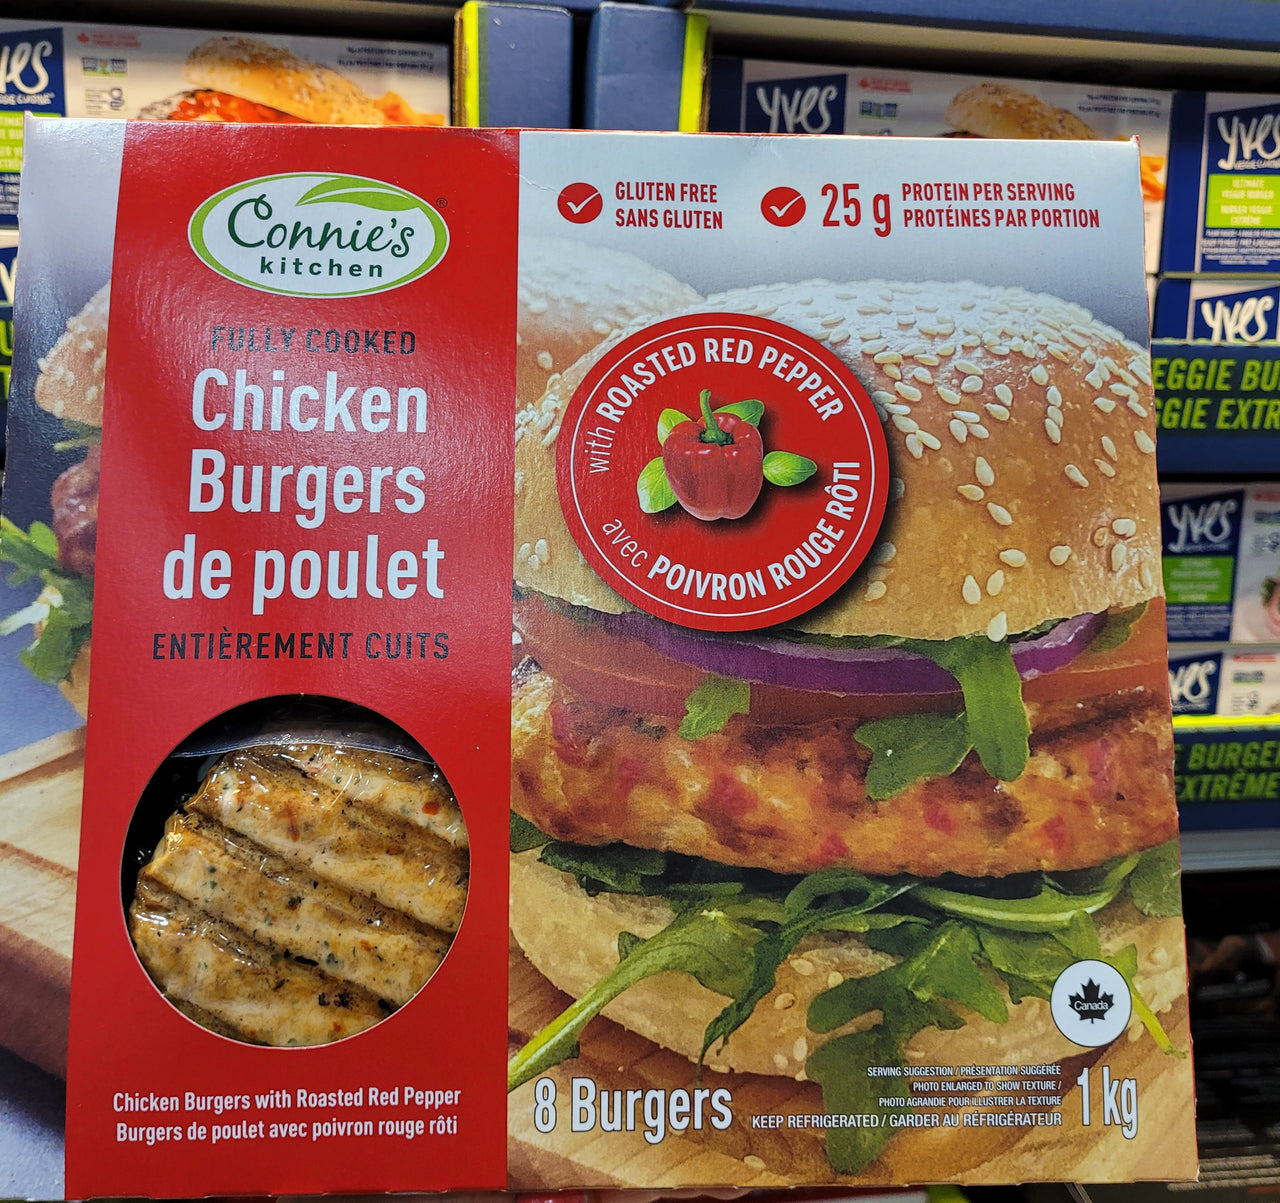 Image of Connie's Kitchen Chicken Burgers with roasted red pepper